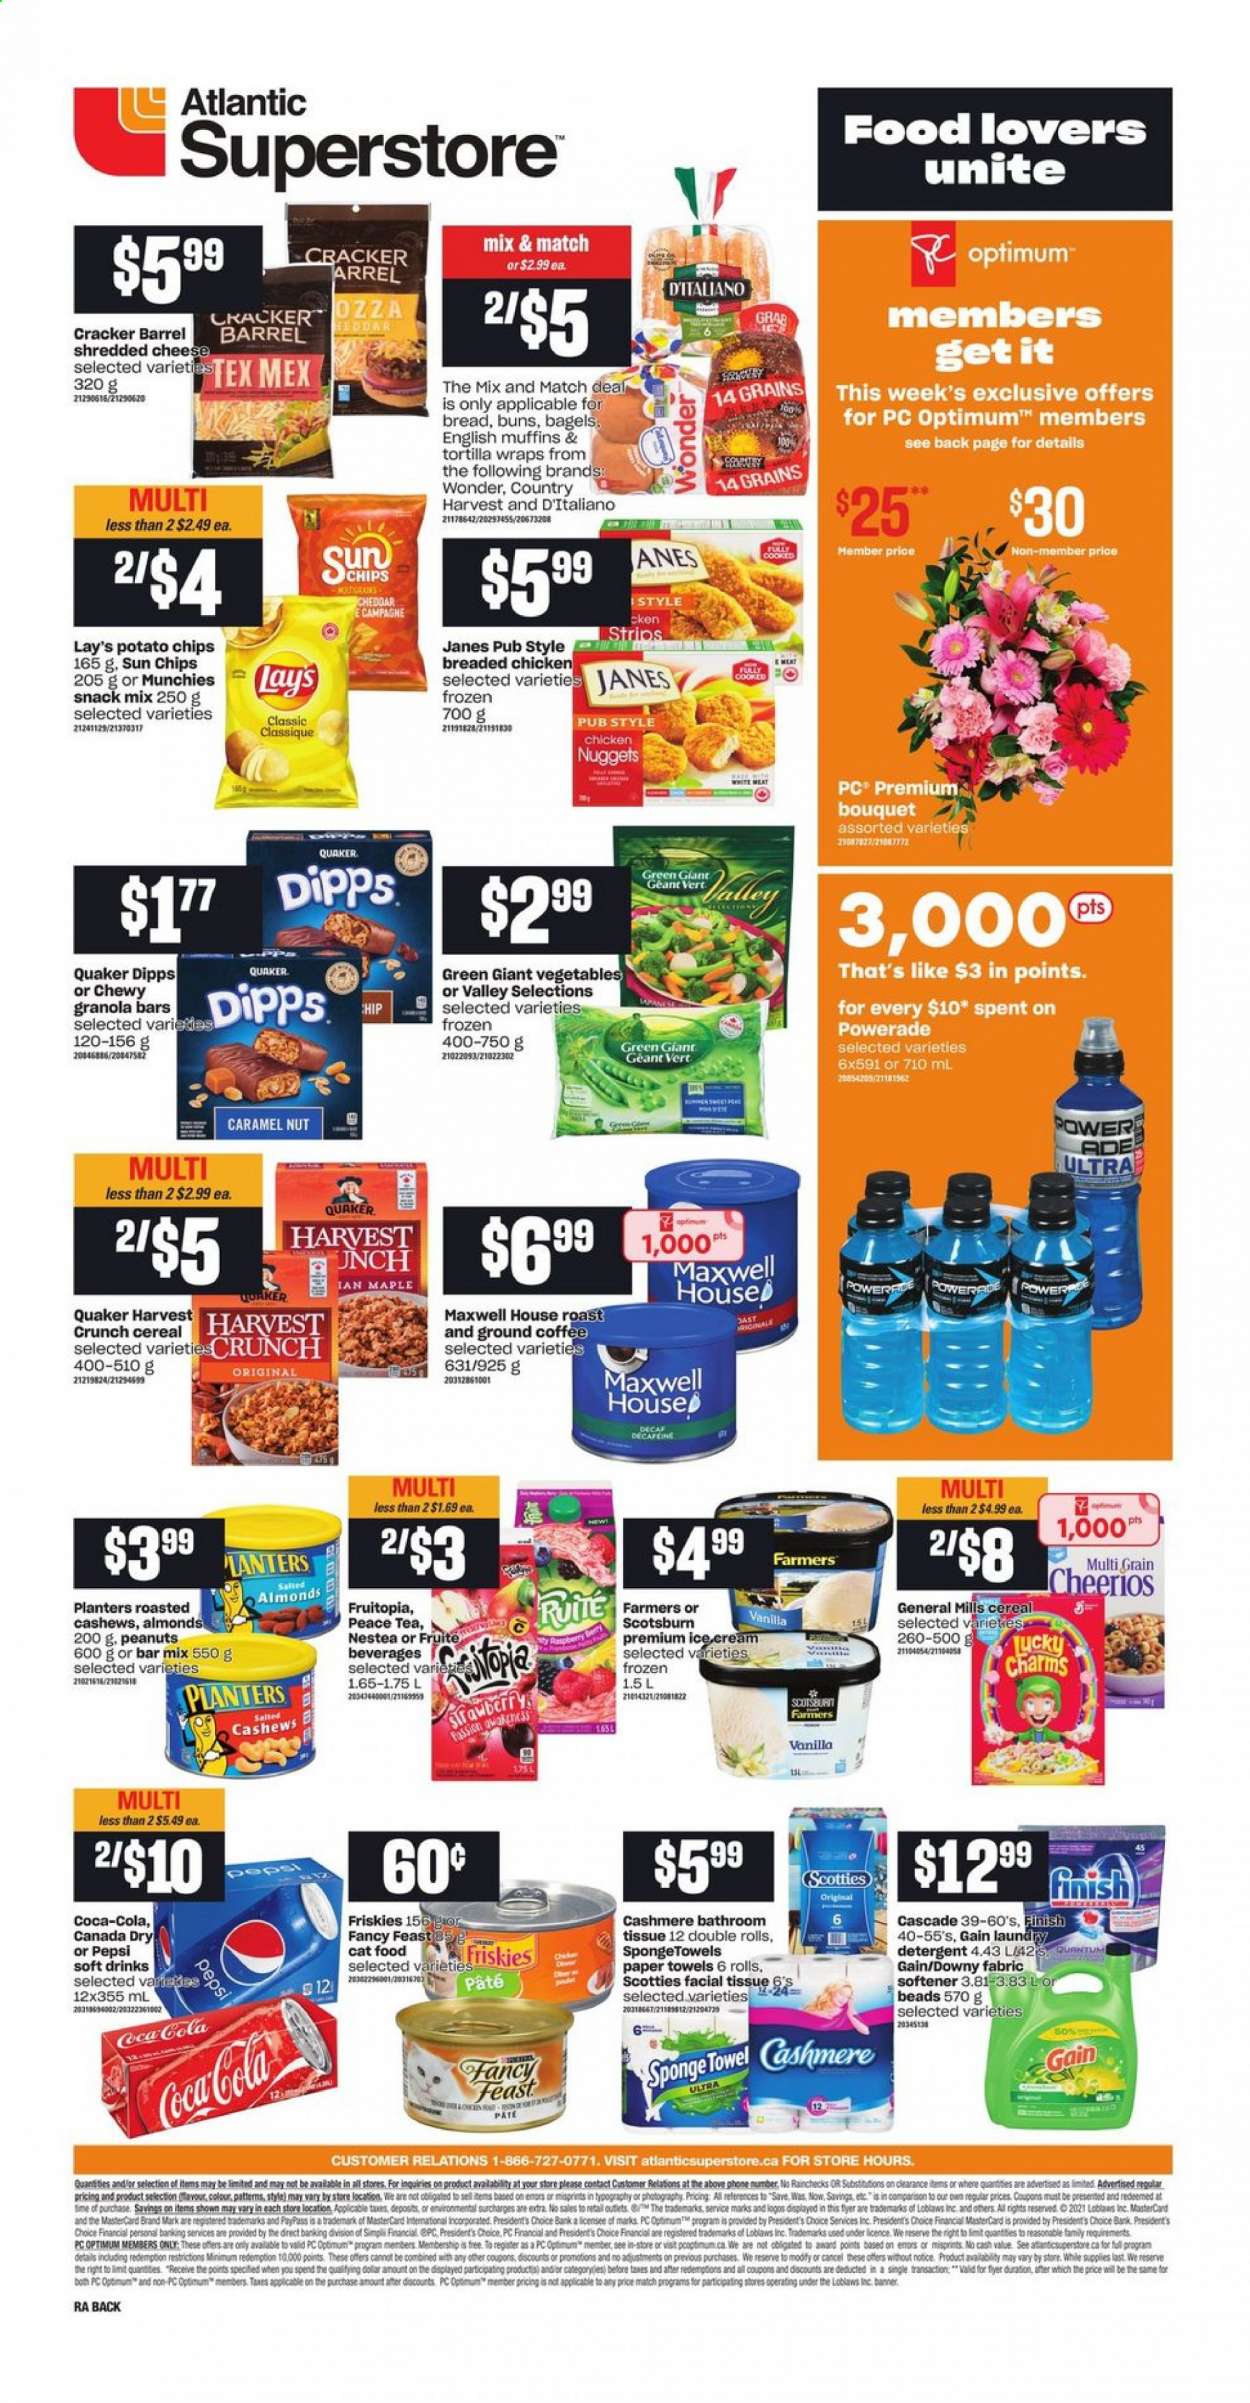 thumbnail - Atlantic Superstore Flyer - June 03, 2021 - June 09, 2021 - Sales products - bagels, english muffins, tortillas, buns, wraps, nuggets, fried chicken, chicken nuggets, Quaker, shredded cheese, Président, Country Harvest, snack, crackers, potato chips, Lay’s, cereals, Cheerios, granola bar, caramel, almonds, cashews, peanuts, Planters, Canada Dry, Coca-Cola, Powerade, Pepsi, soft drink, Maxwell House, tea, coffee, ground coffee, L'Or, bath tissue, kitchen towels, paper towels, Gain, fabric softener, laundry detergent, Cascade, Downy Laundry, animal food, cat food, Optimum, Fancy Feast, Friskies, bouquet. Page 2.